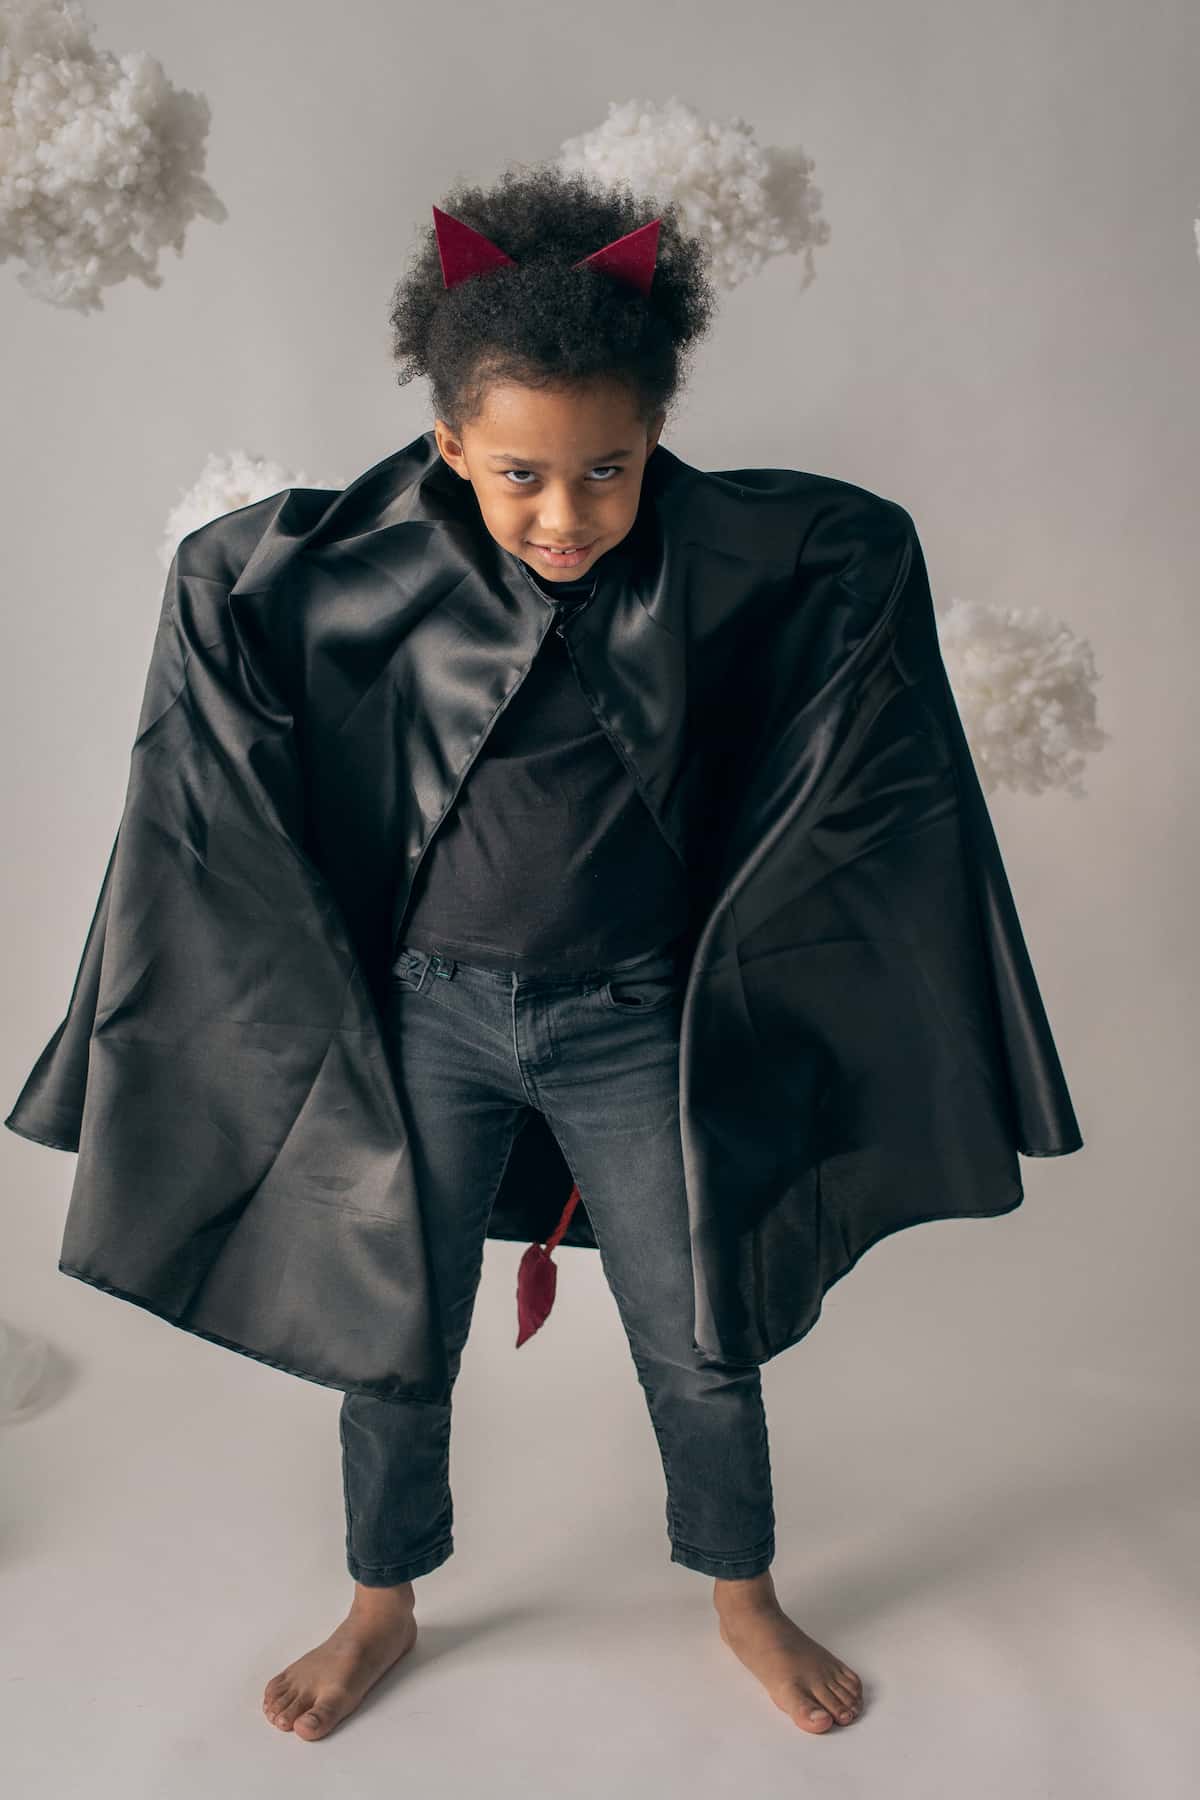 spotcovery-little-girl-in-leather-cloak-and-devils-horns-kids-fashion-top-6-black-owned-clothing-stores-in-the-us